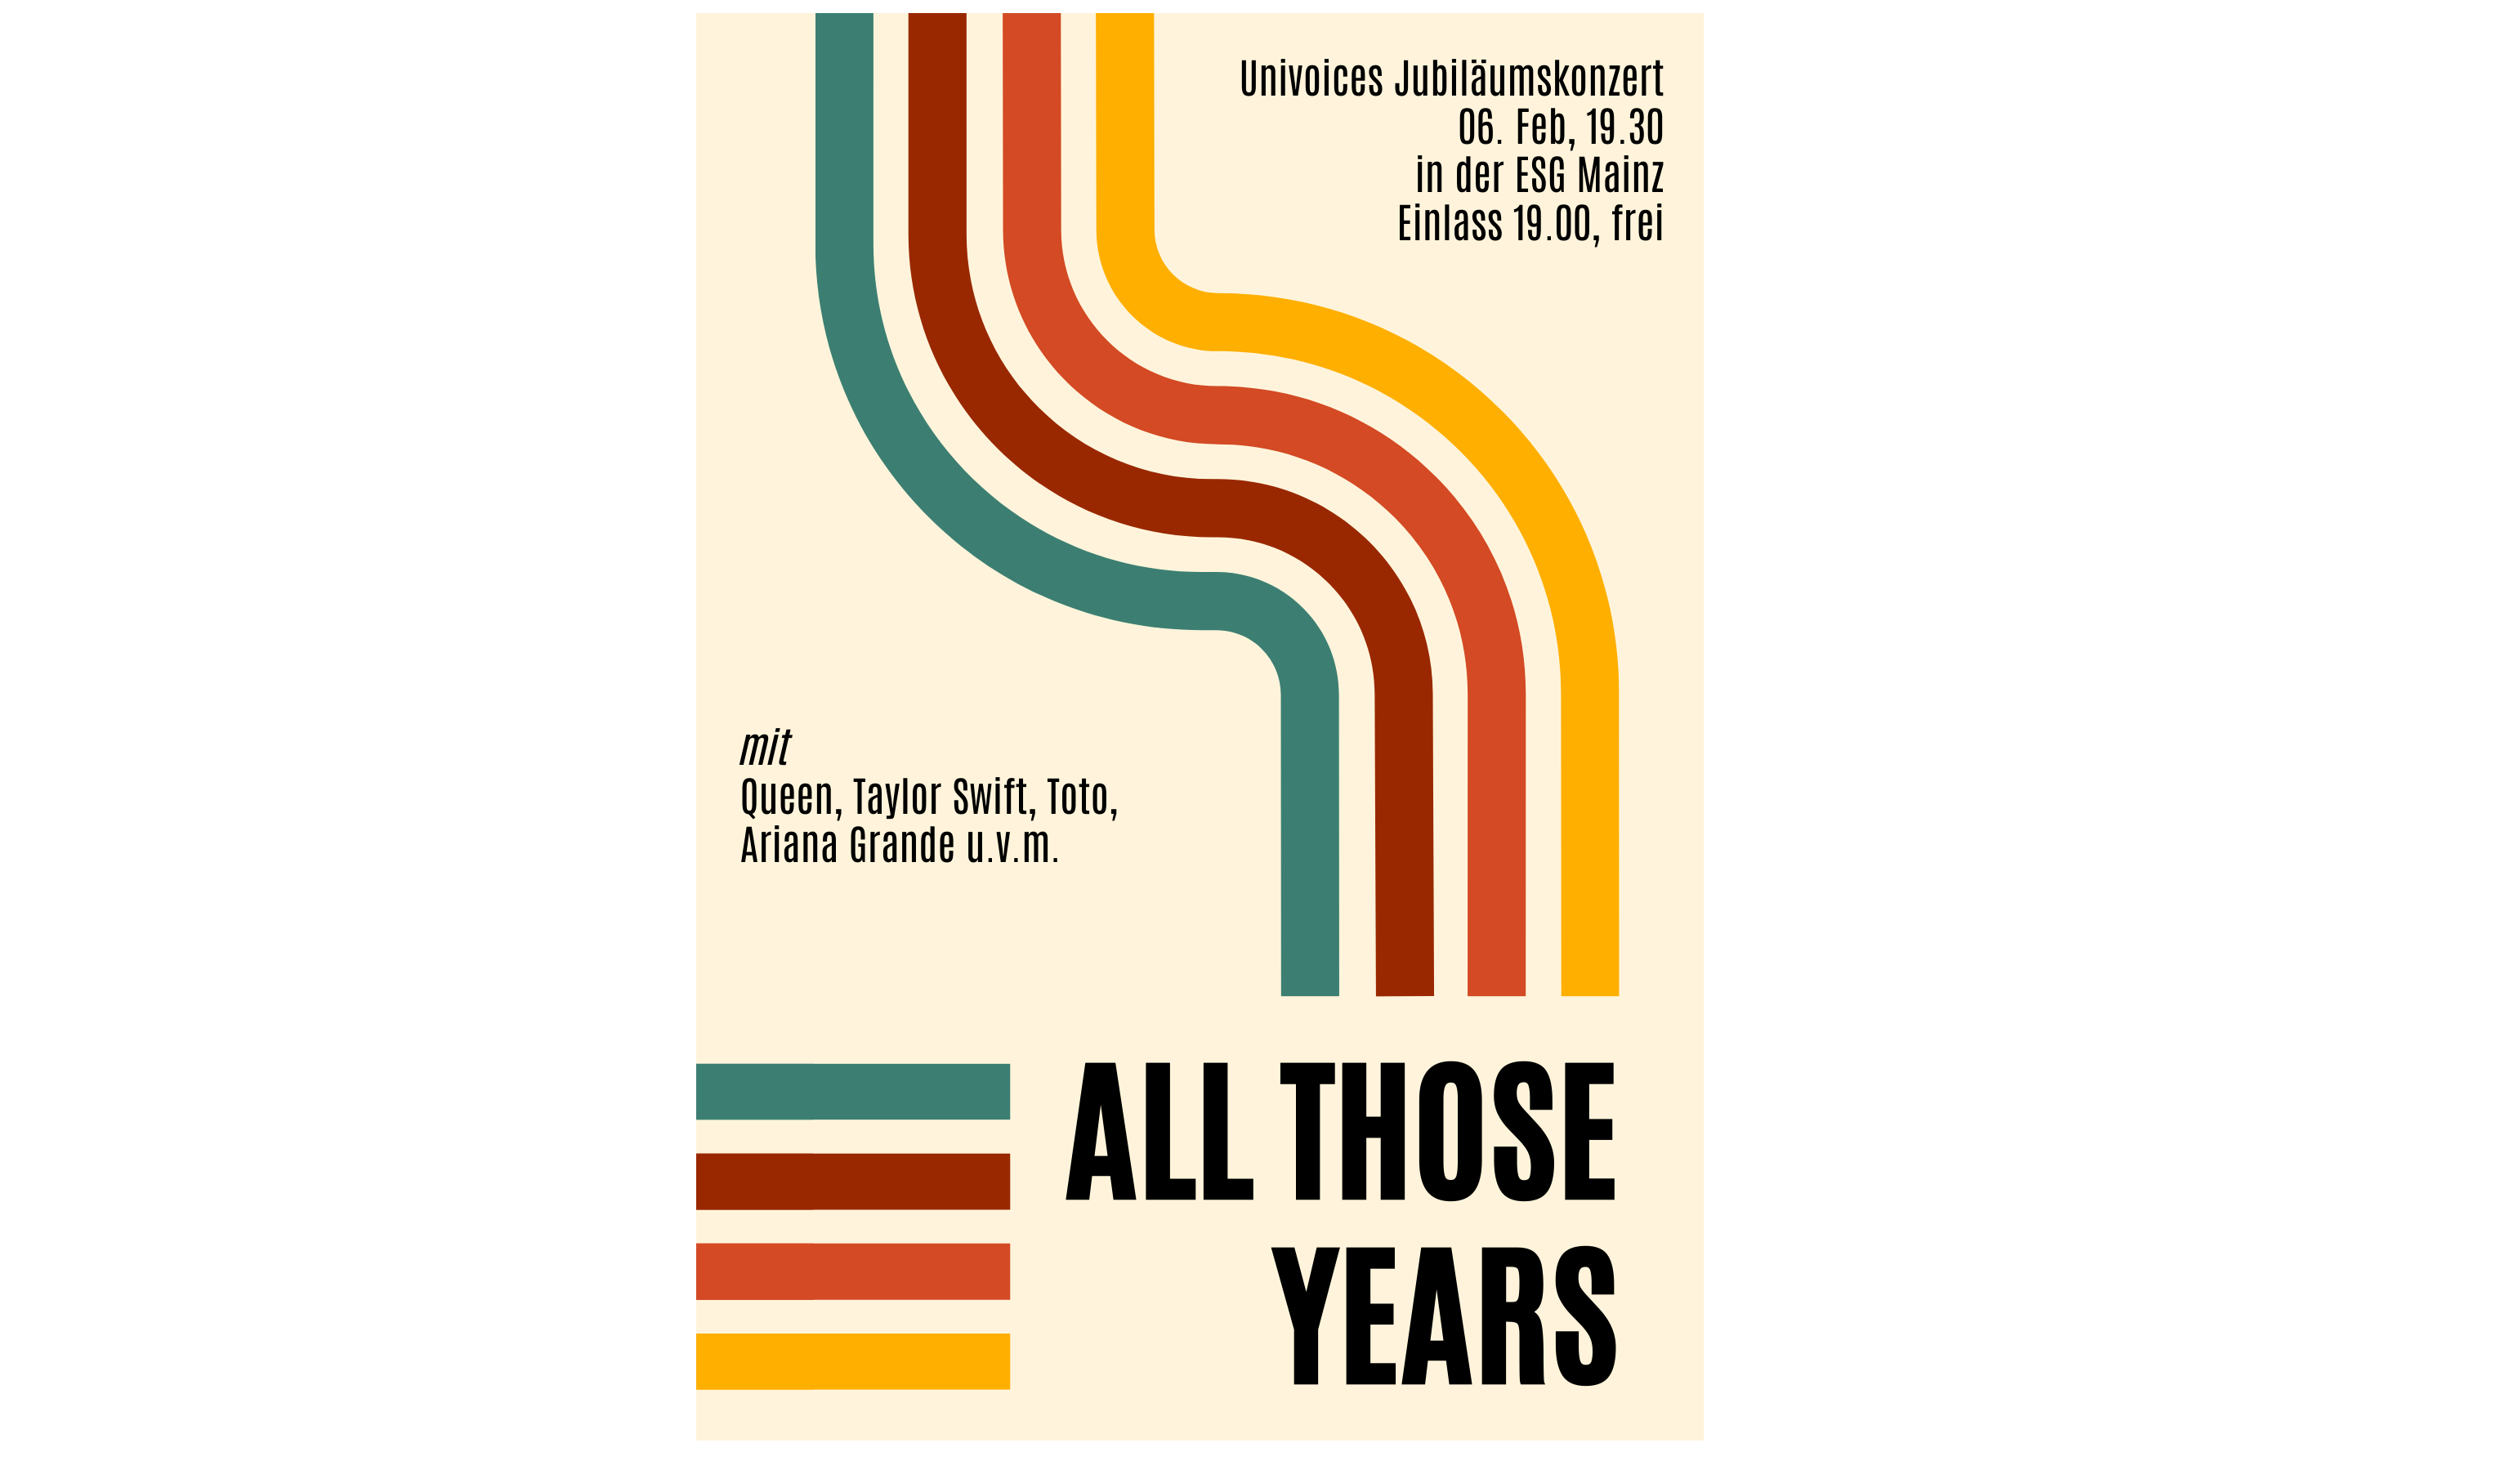 "All those years", 25 Jahre UniVoices